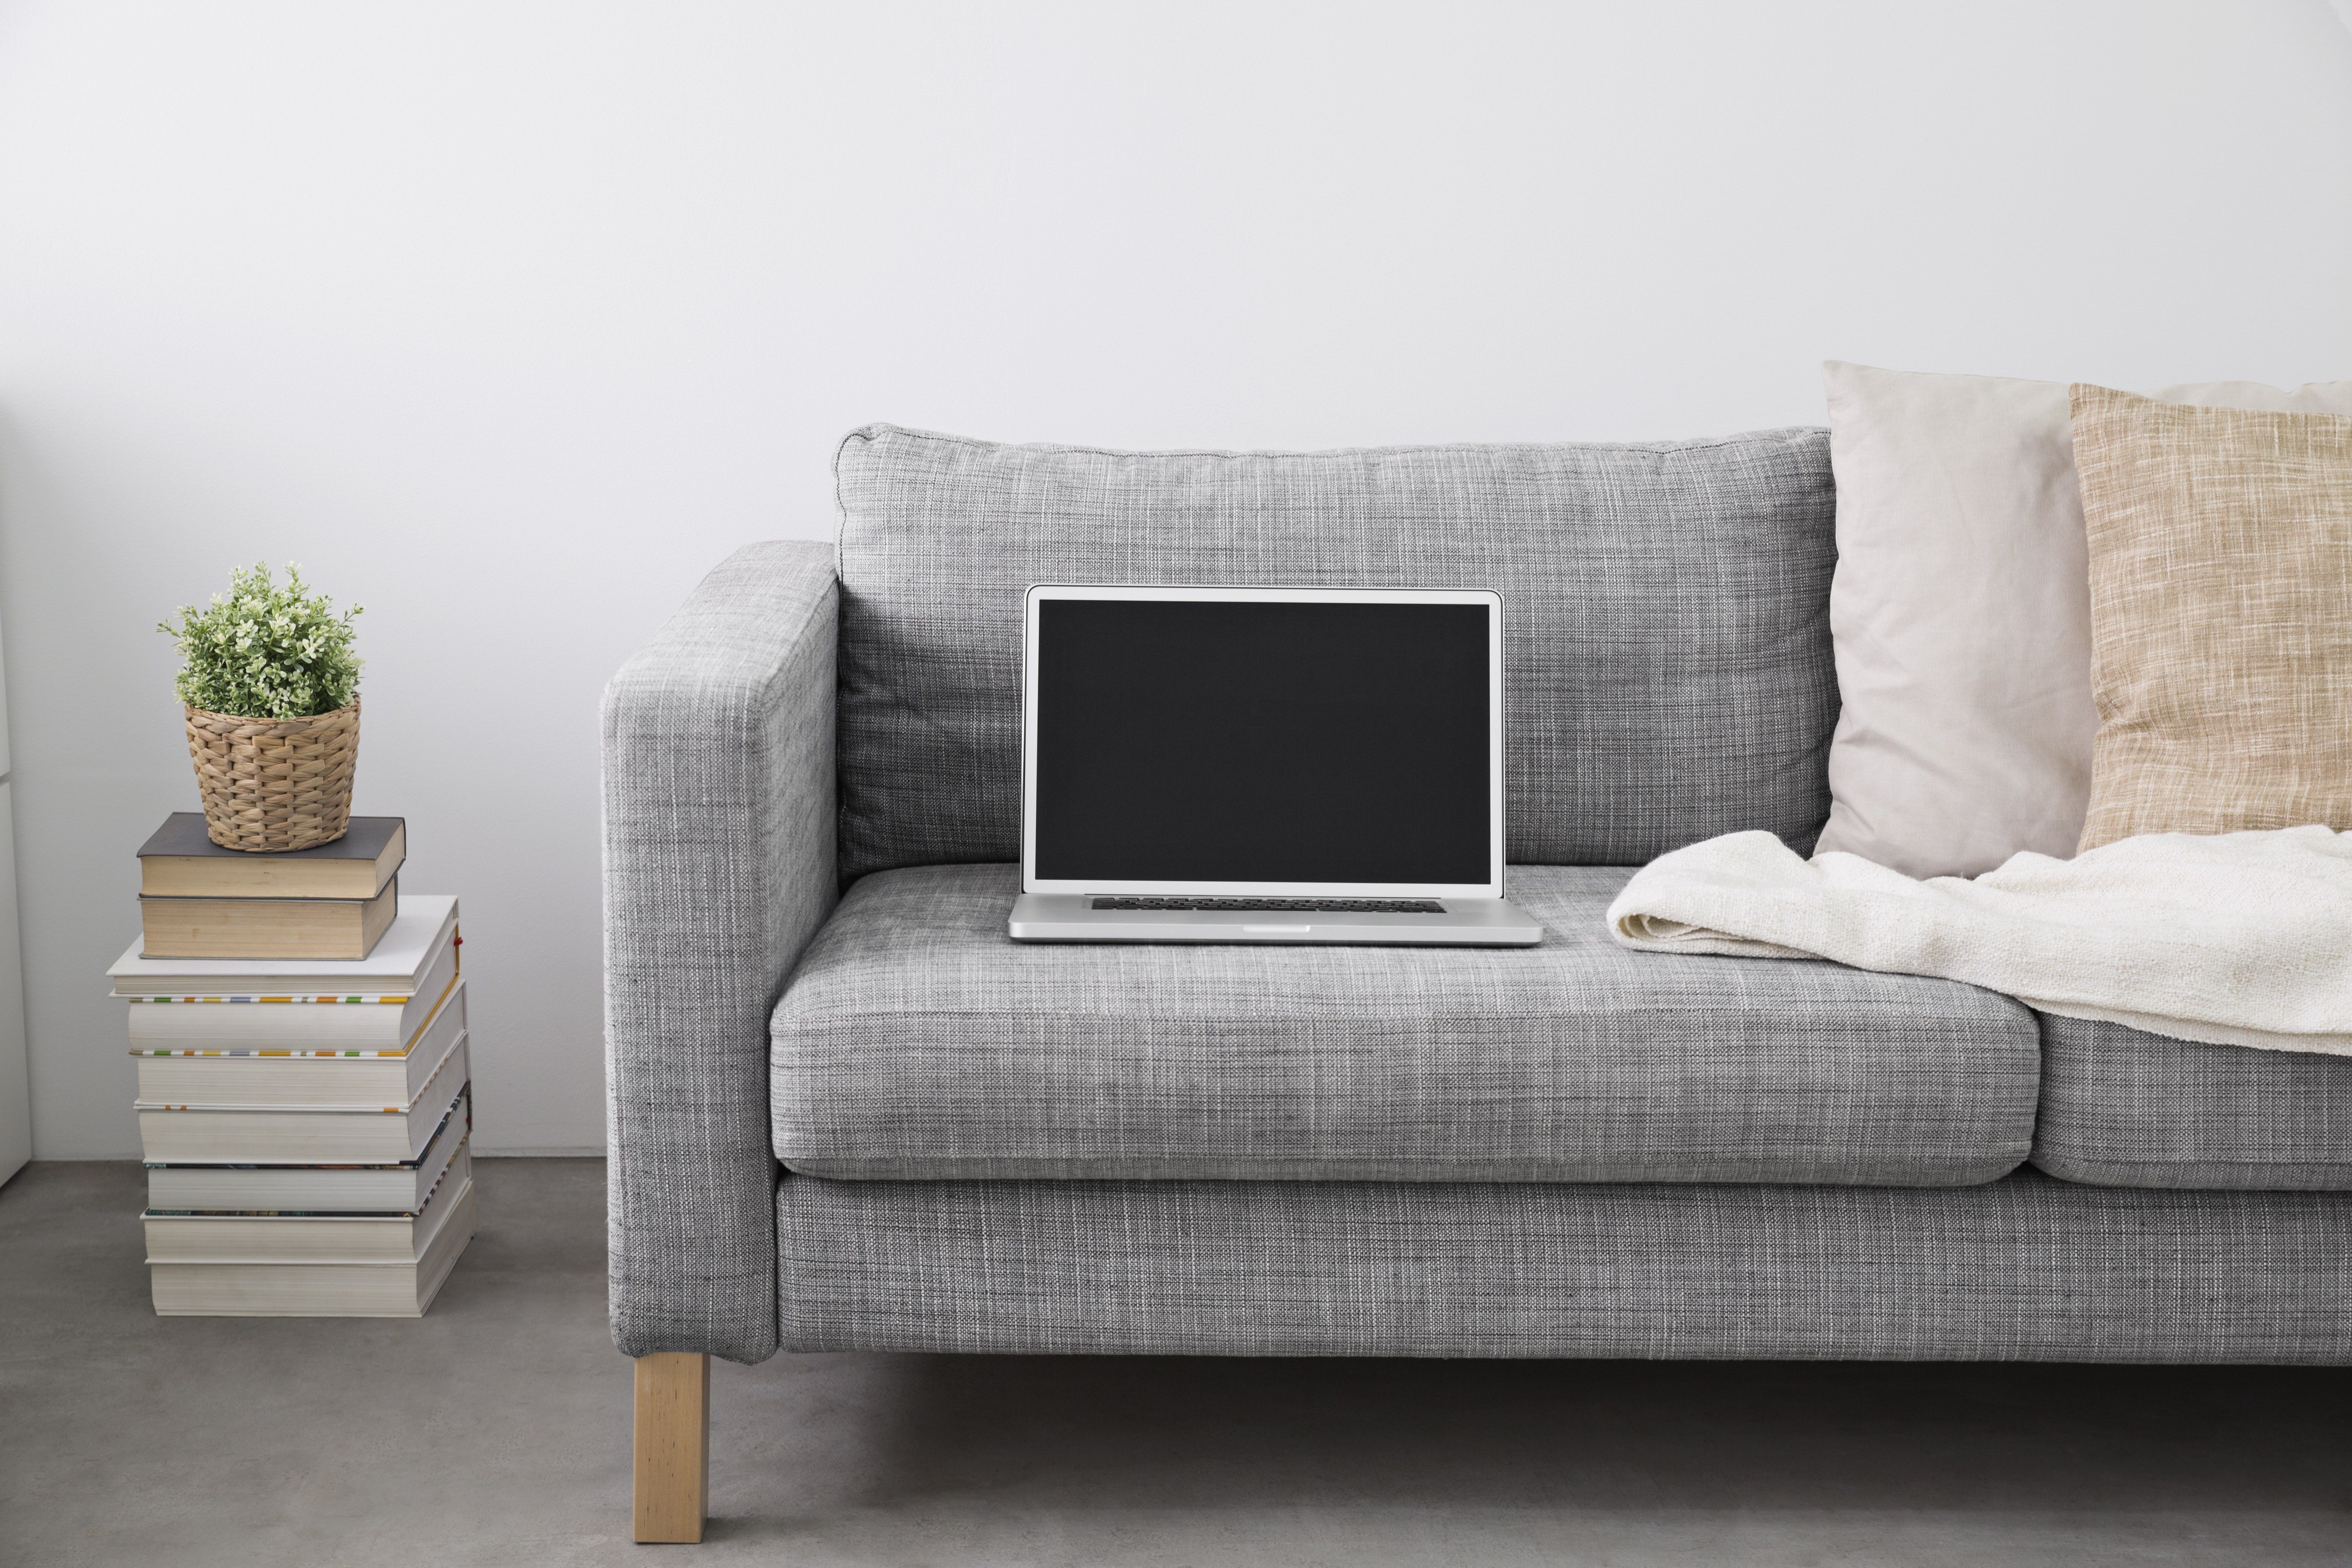 How To Buy A Sofa Online - Buying Furniture Online